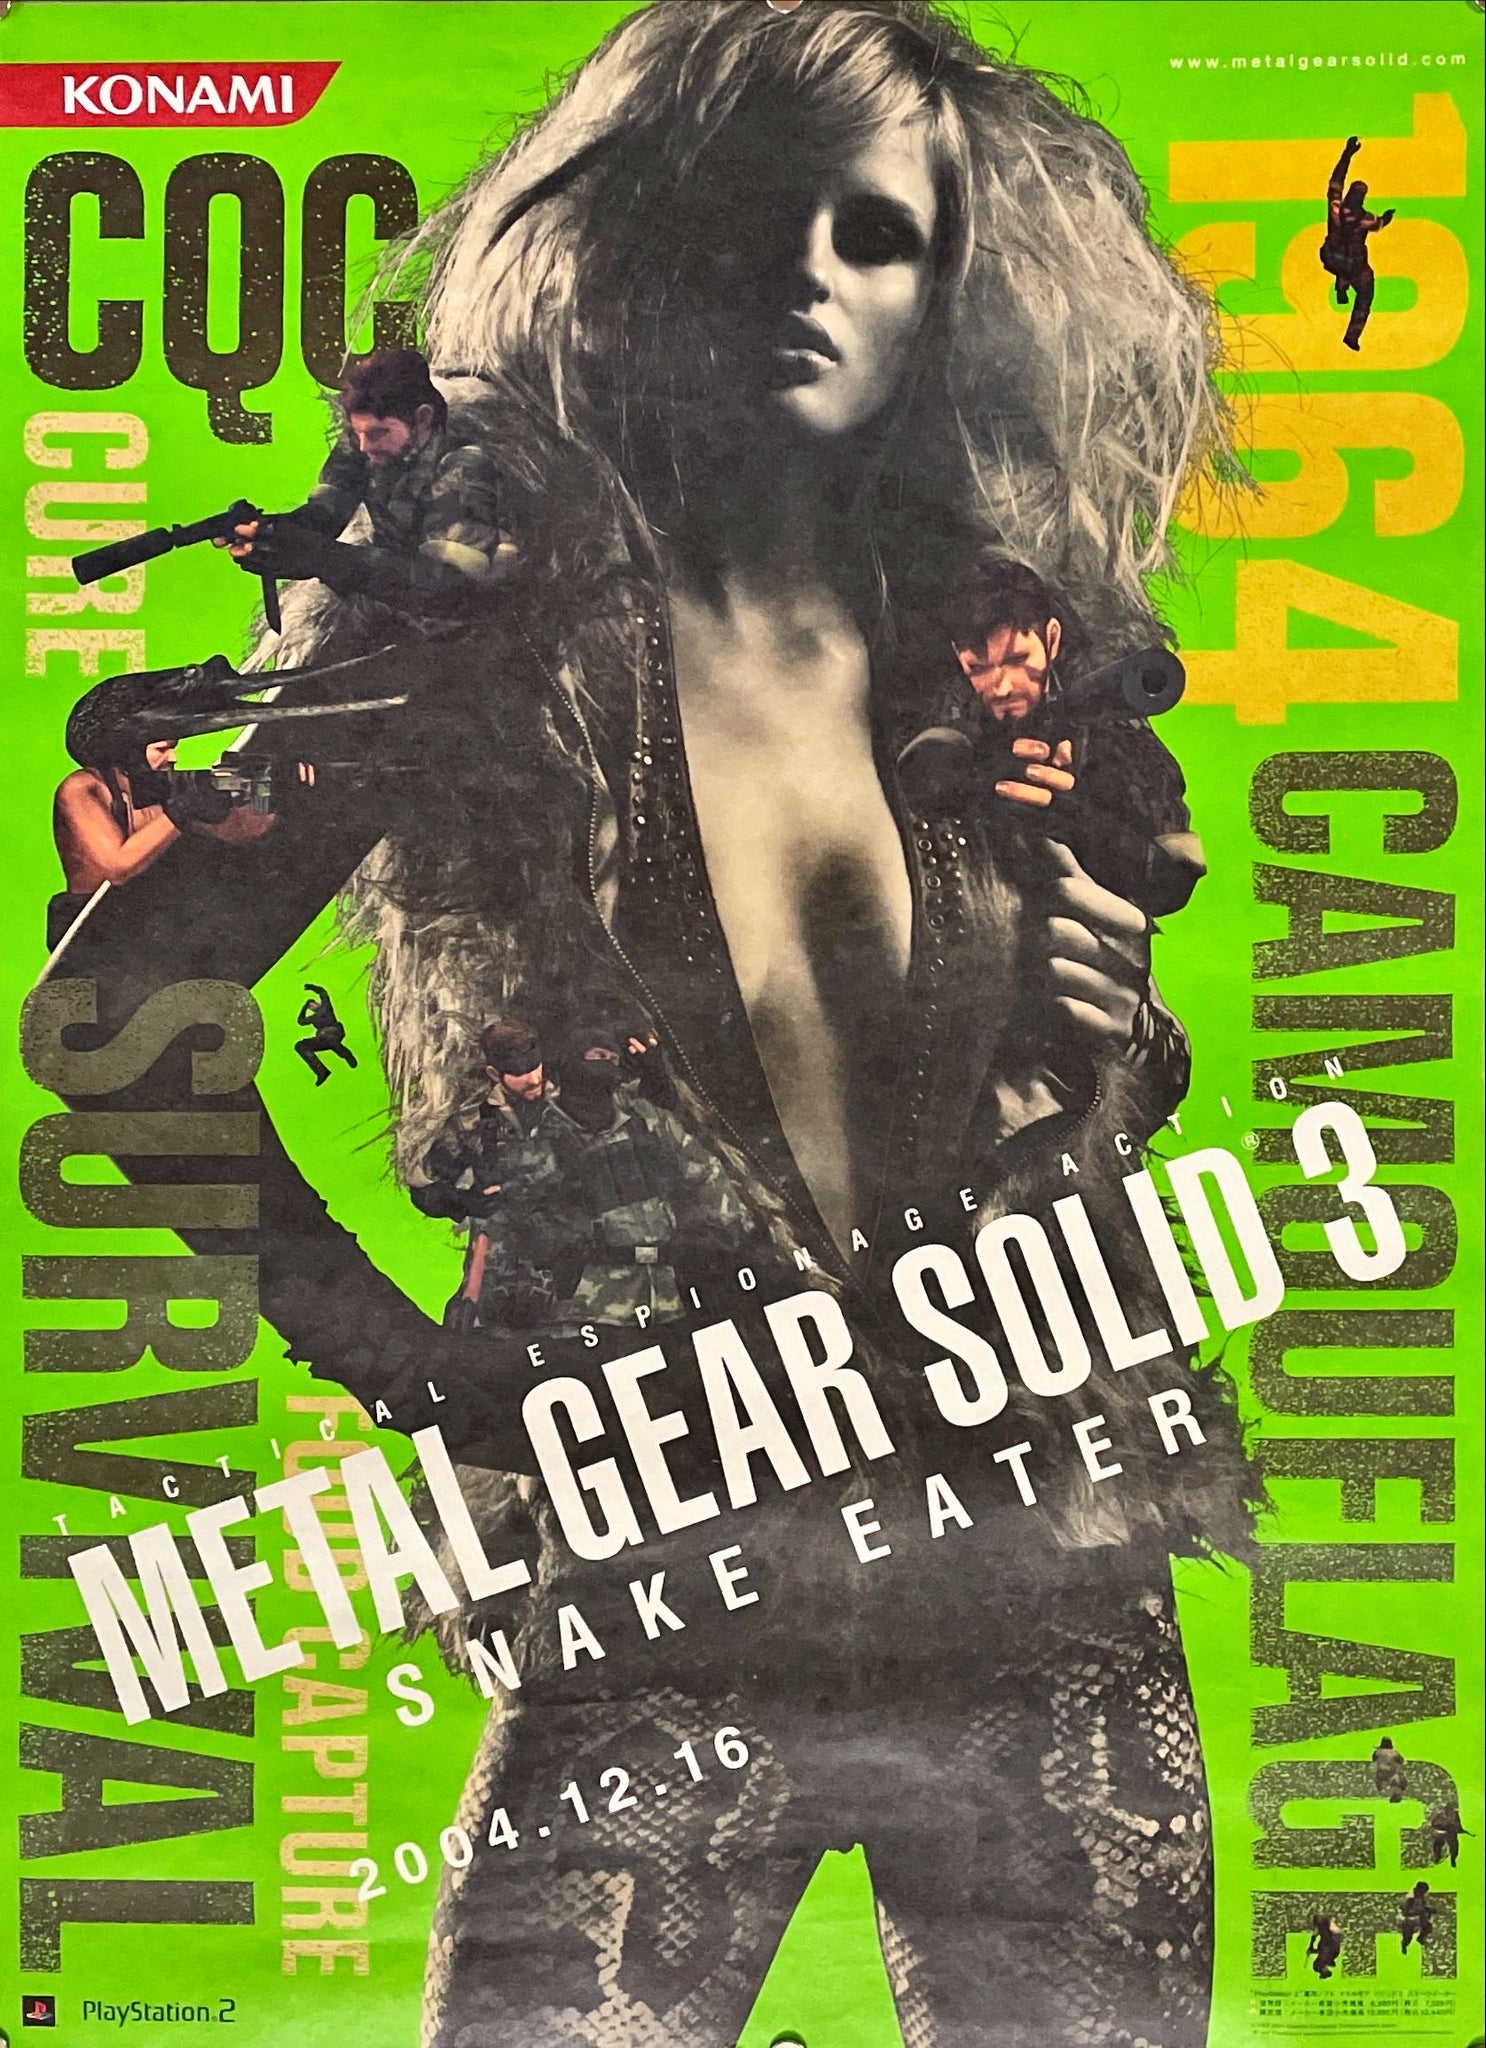 METAL GEAR SOLID 3: SNAKE EATER Poster (A2)